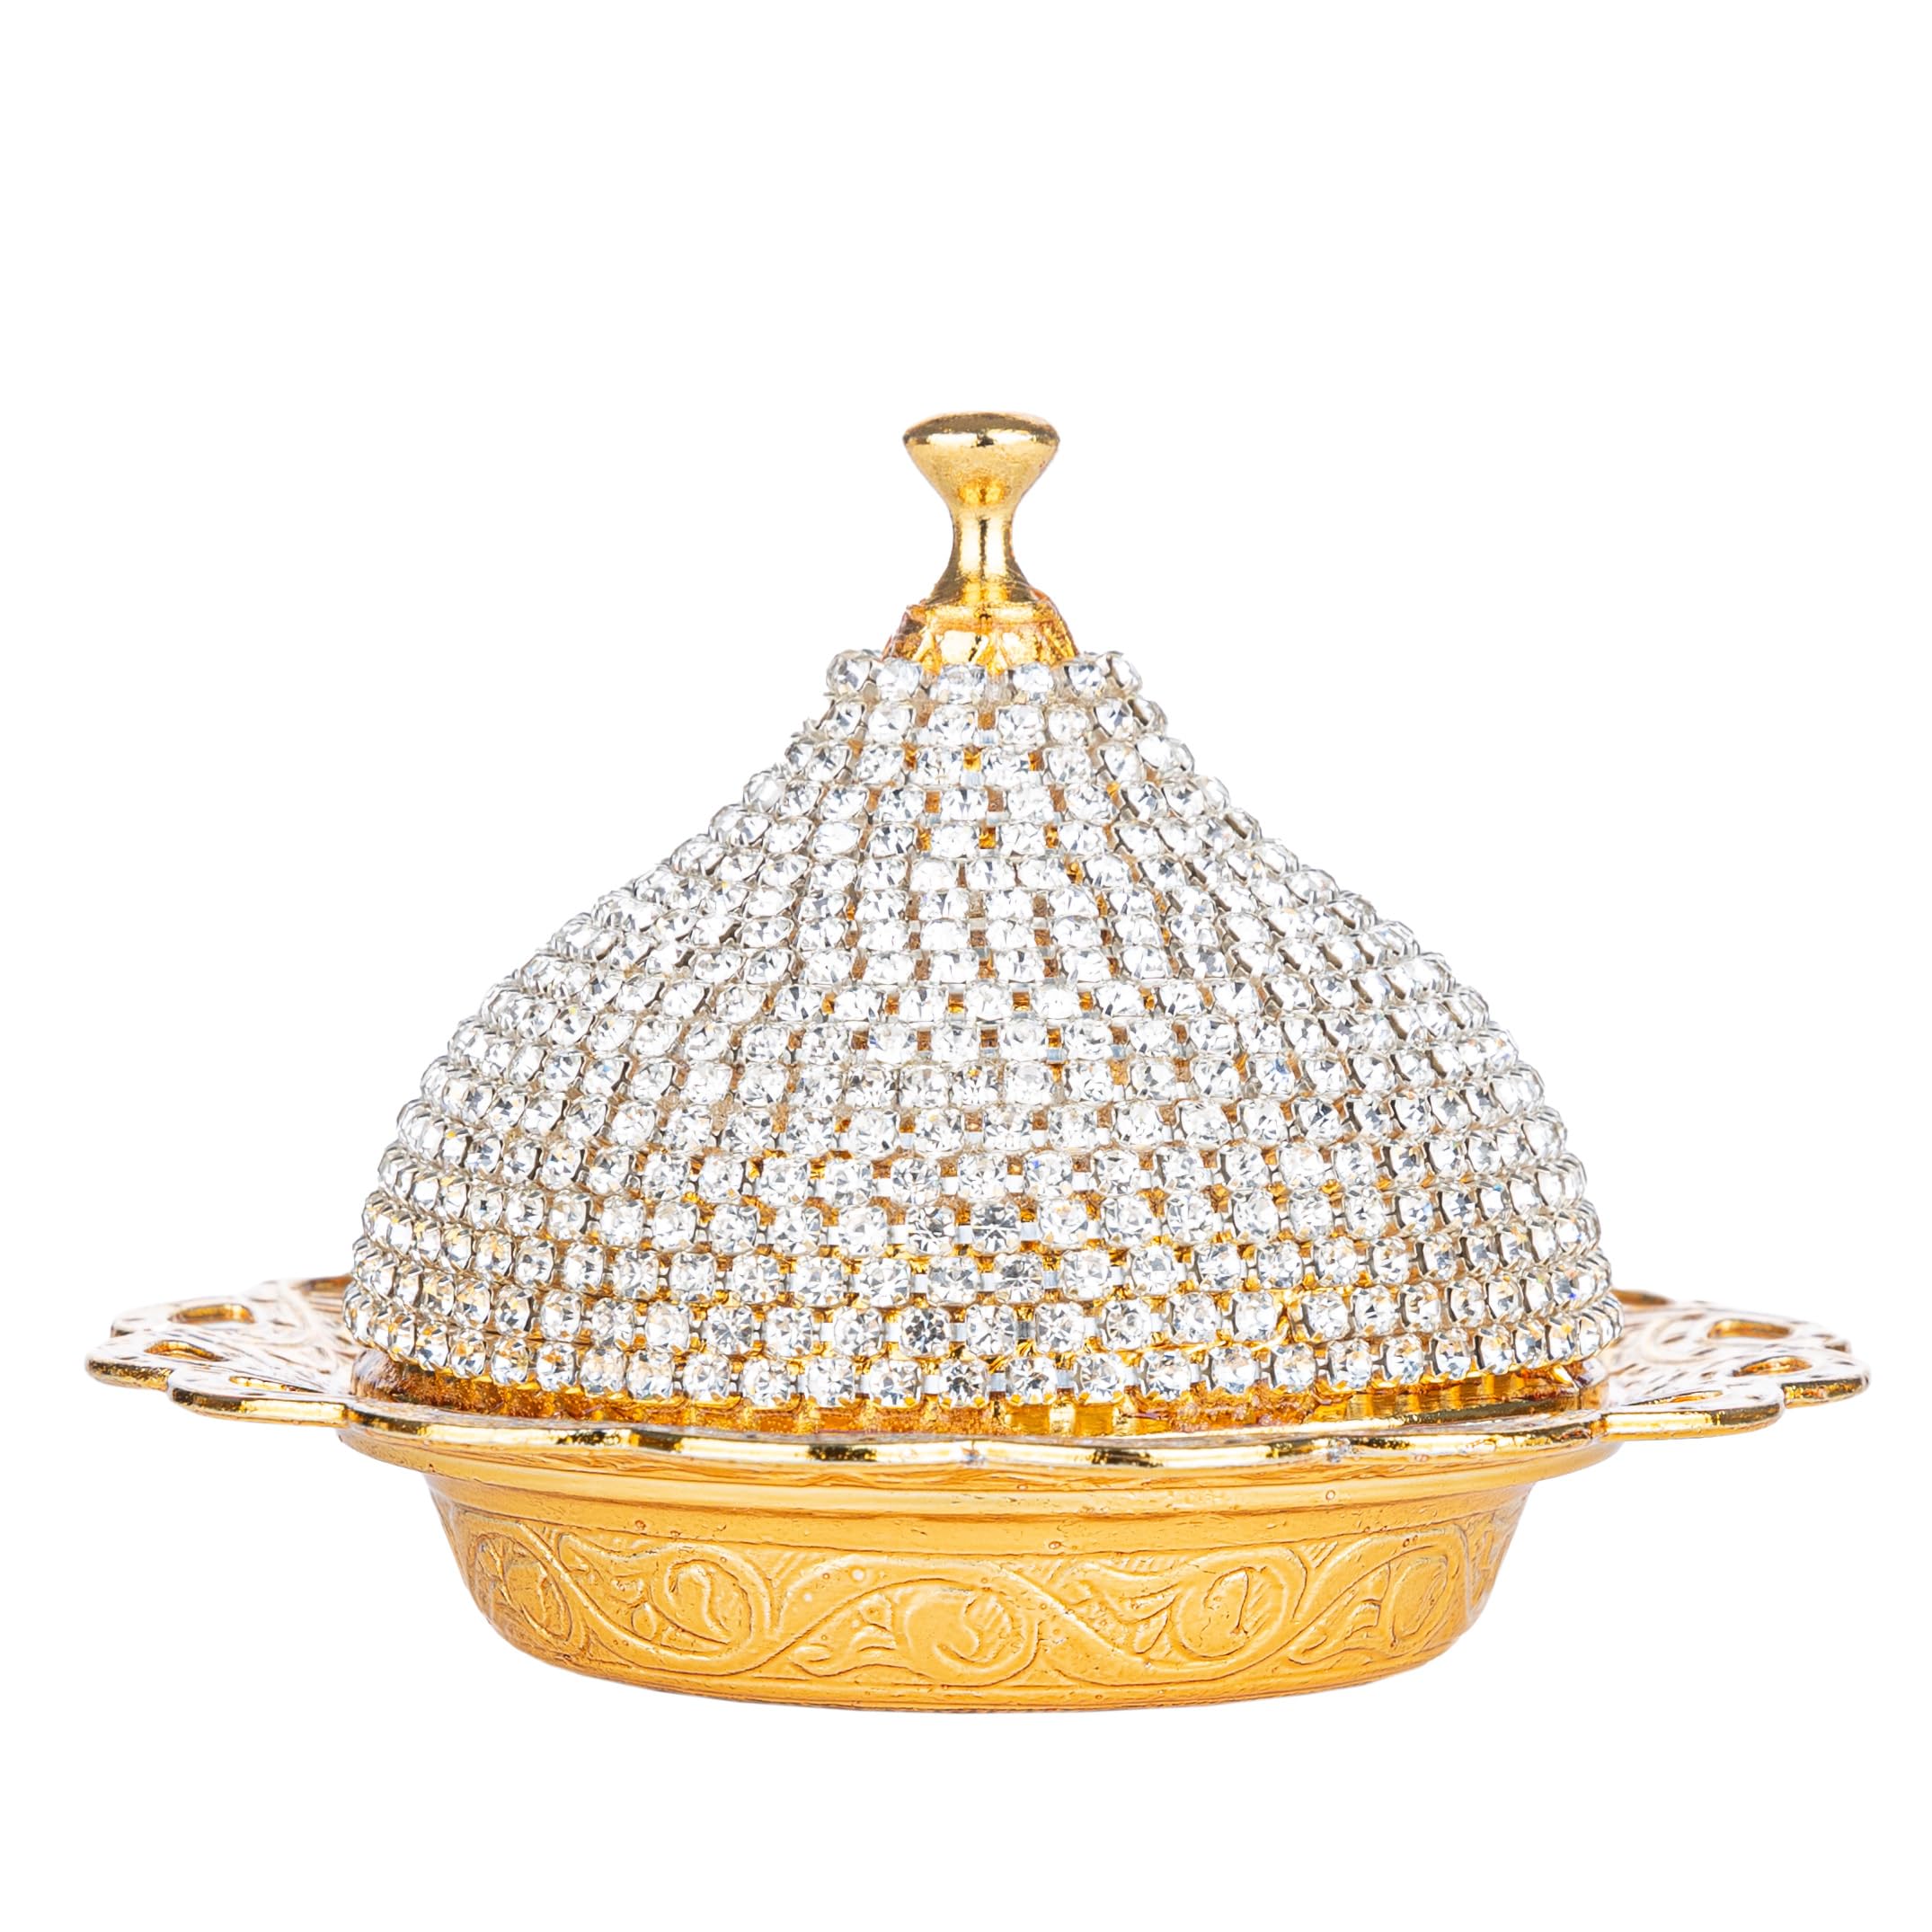 Alisveristime Ottoman Turkish Greek Arabic Espresso Coffee Cups with Saucer and Lid (Crystal Set) (Set of 2) (Gold)